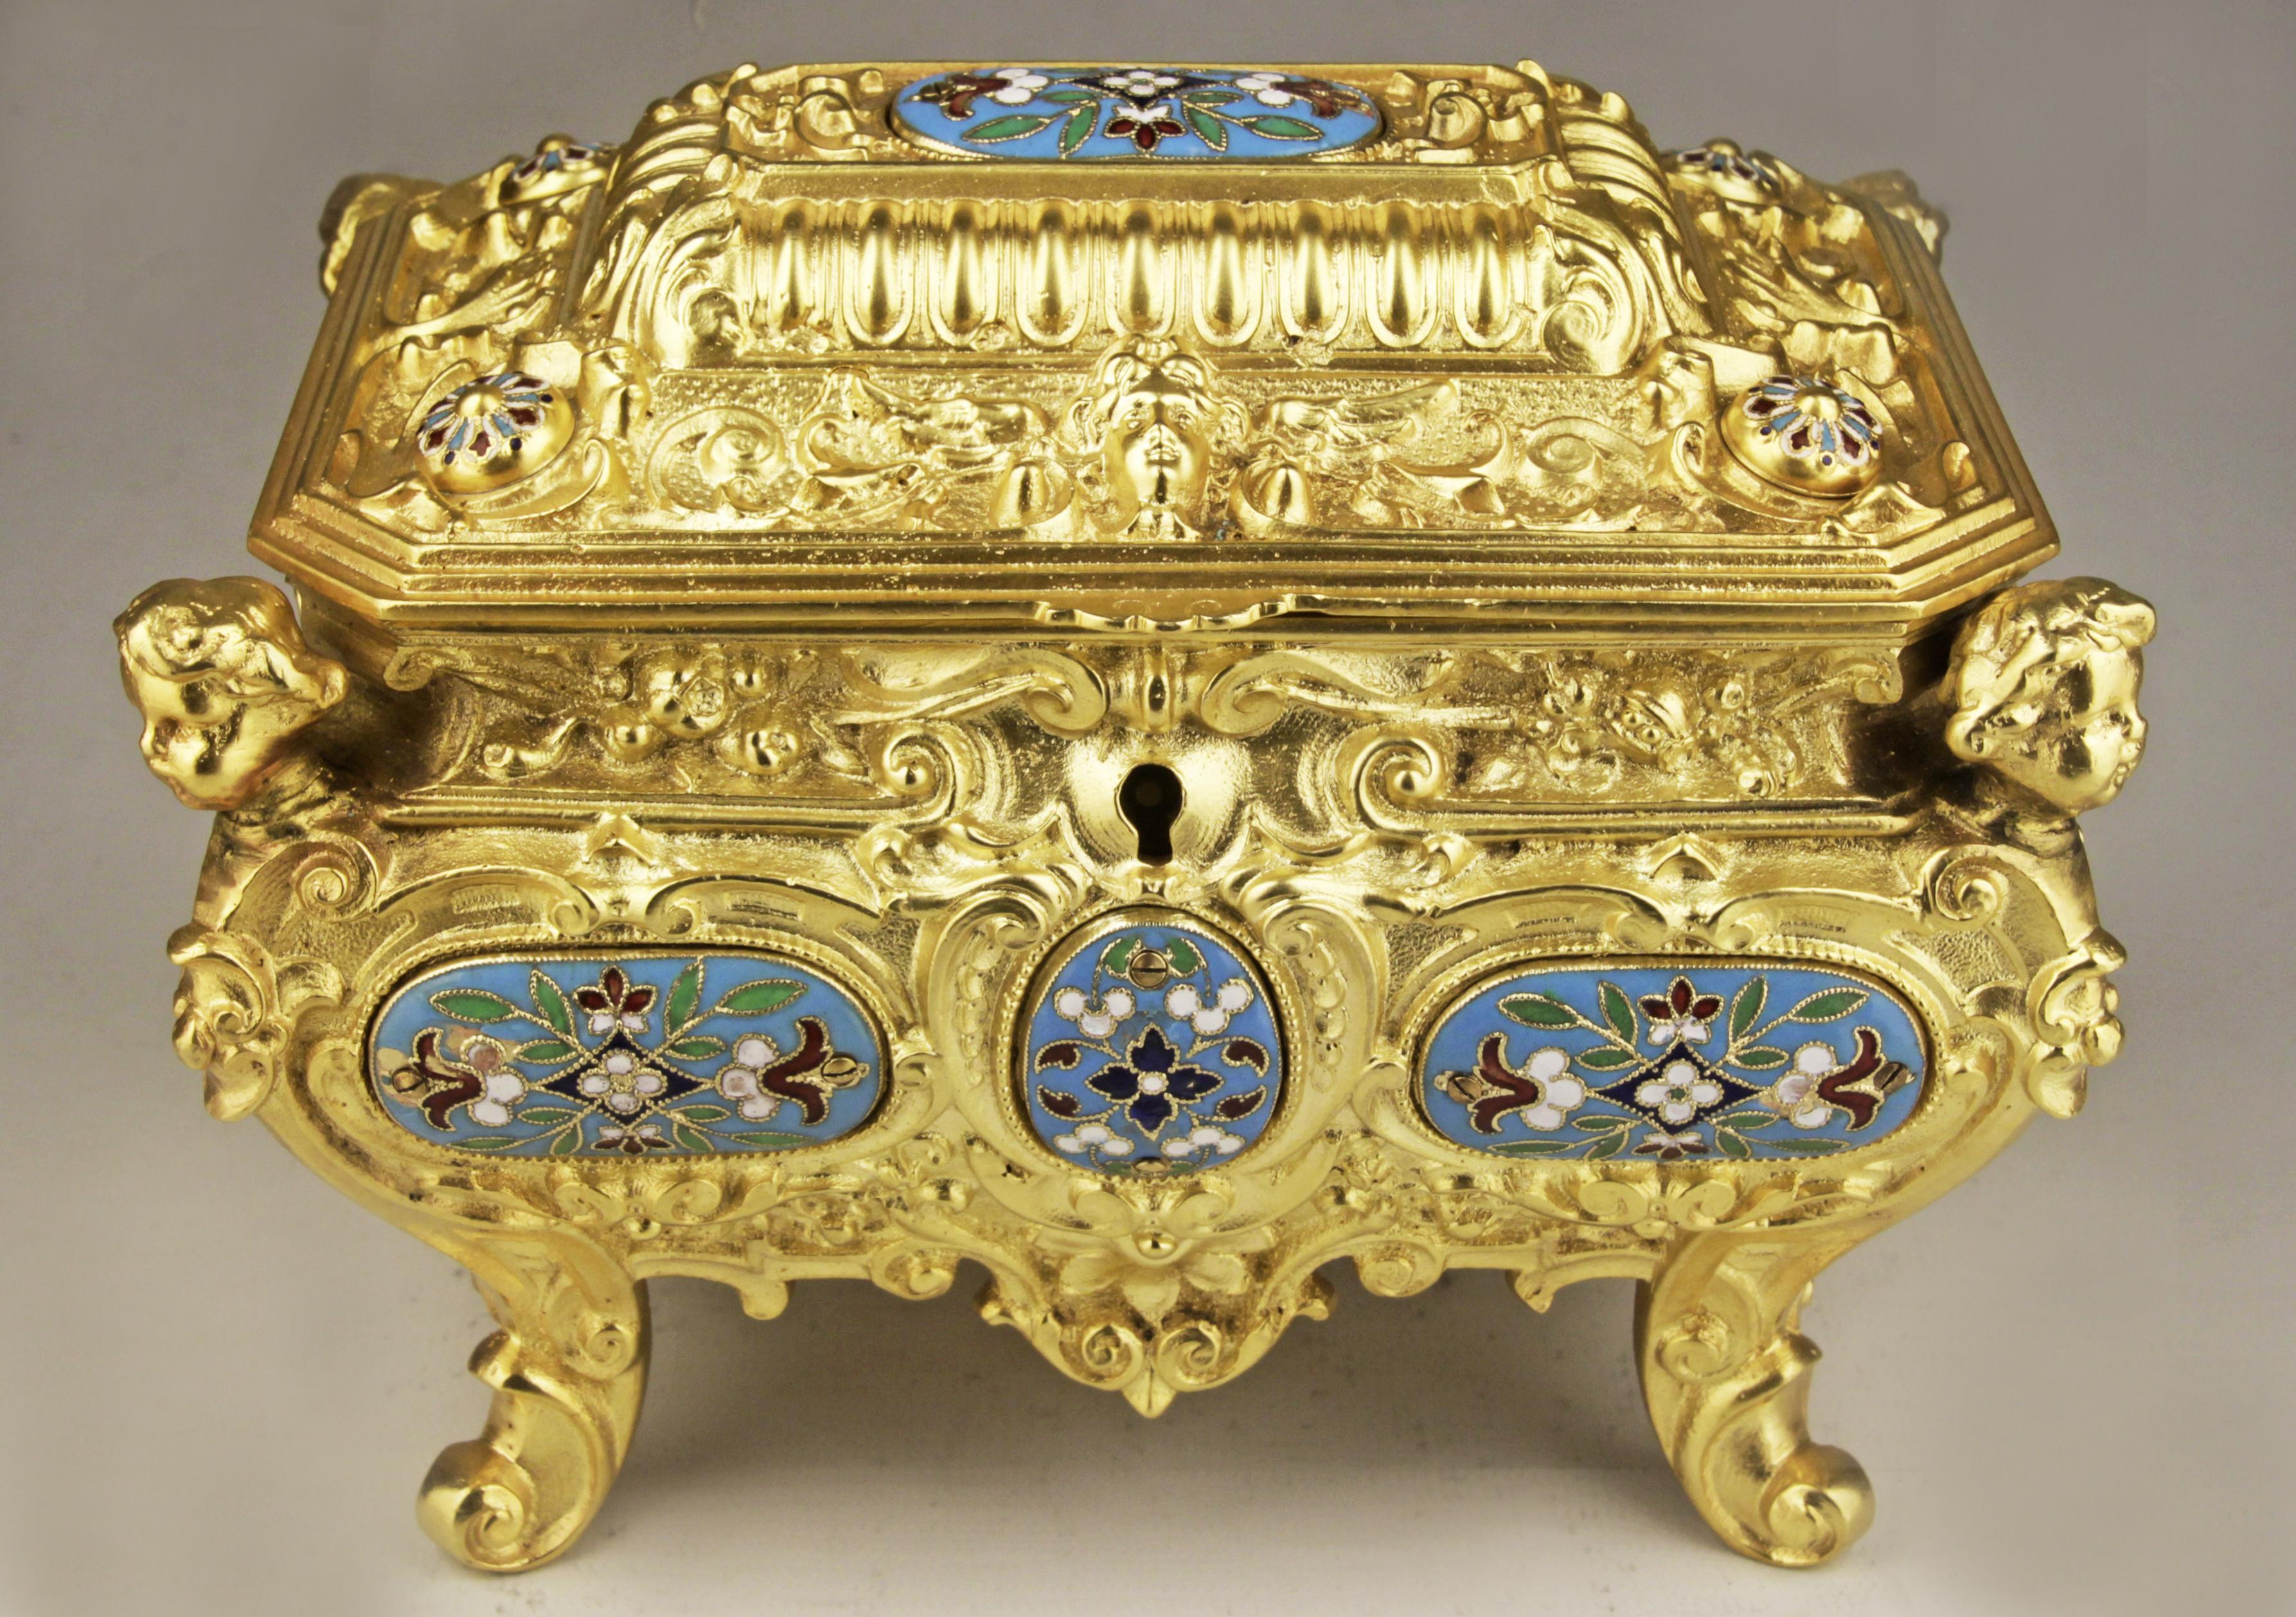 19th century French Empire cloisonne bronze jewelry casket with blue velvet interior

By: unknown
Material: bronze, velvet, enamel, metal, copper
Technique: gilt, cloisonné, champlevé, cast, molded, metalwork
Dimensions: 5 in x 7 in x 6 in
Date: